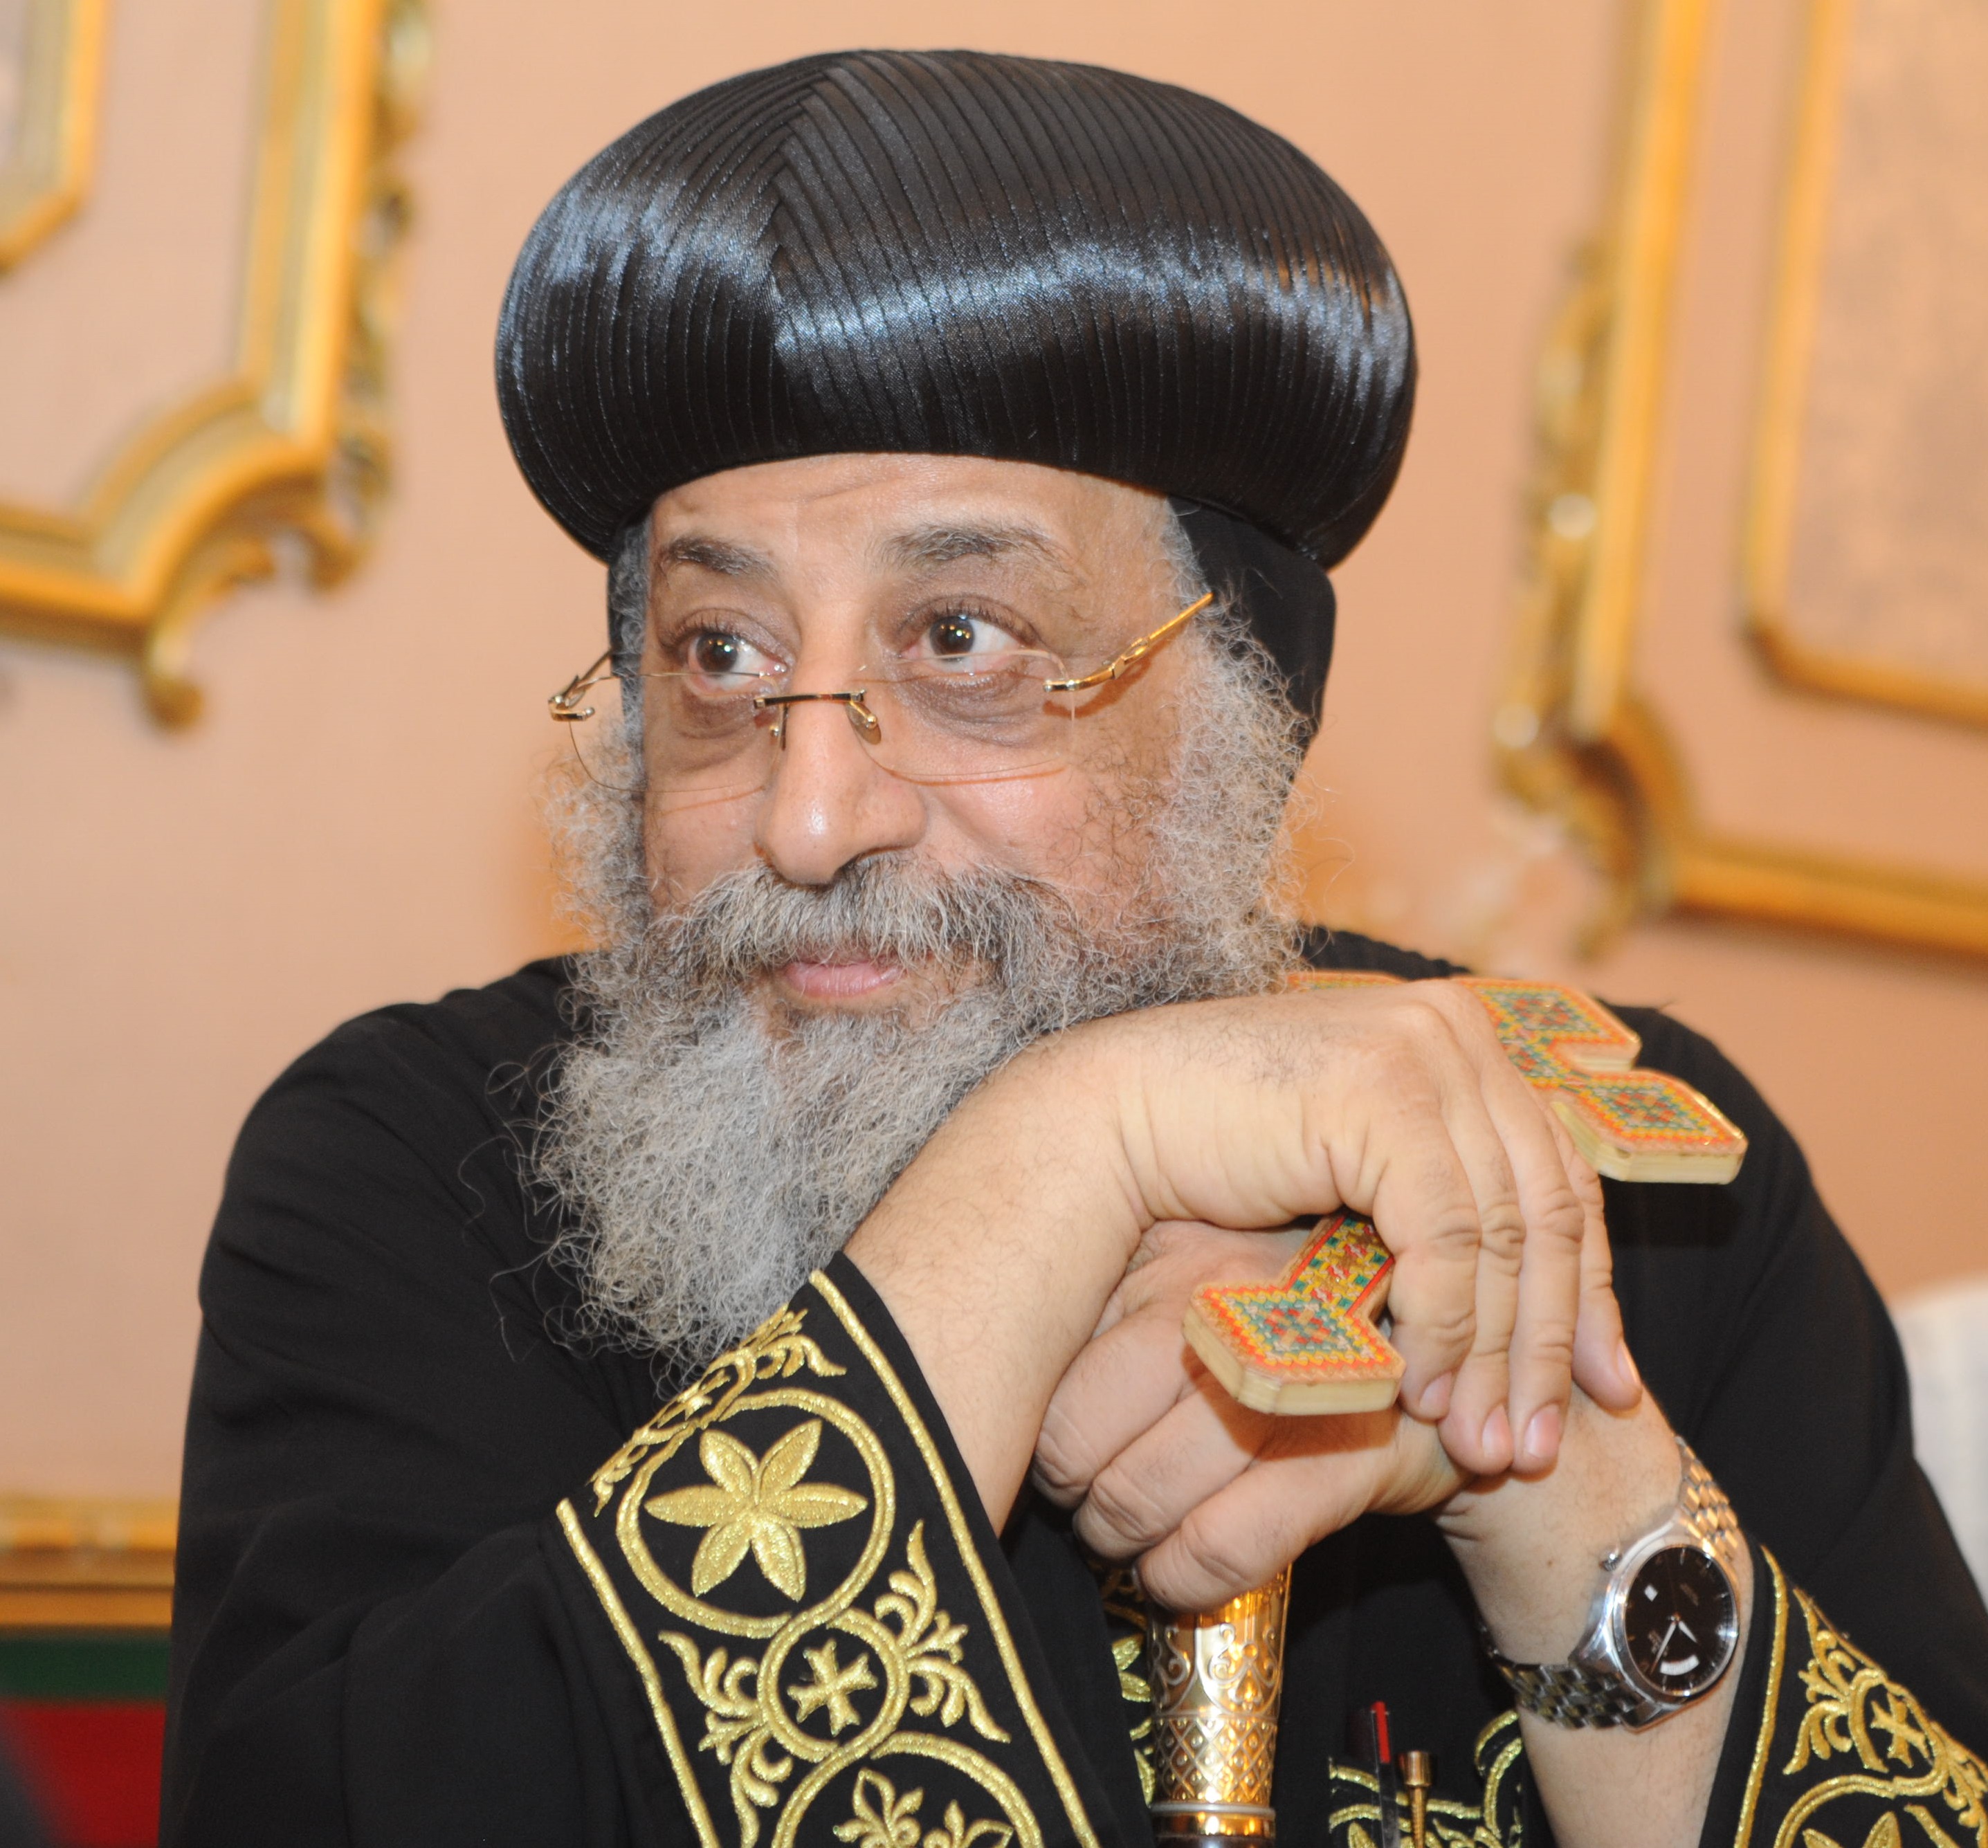 His Holiness Pope Tawadros II, 118th Pope of Alexandria and Patriarch of the See of St. Mark, meets with Coptic Orphans in Cairo, July 12, 2014.